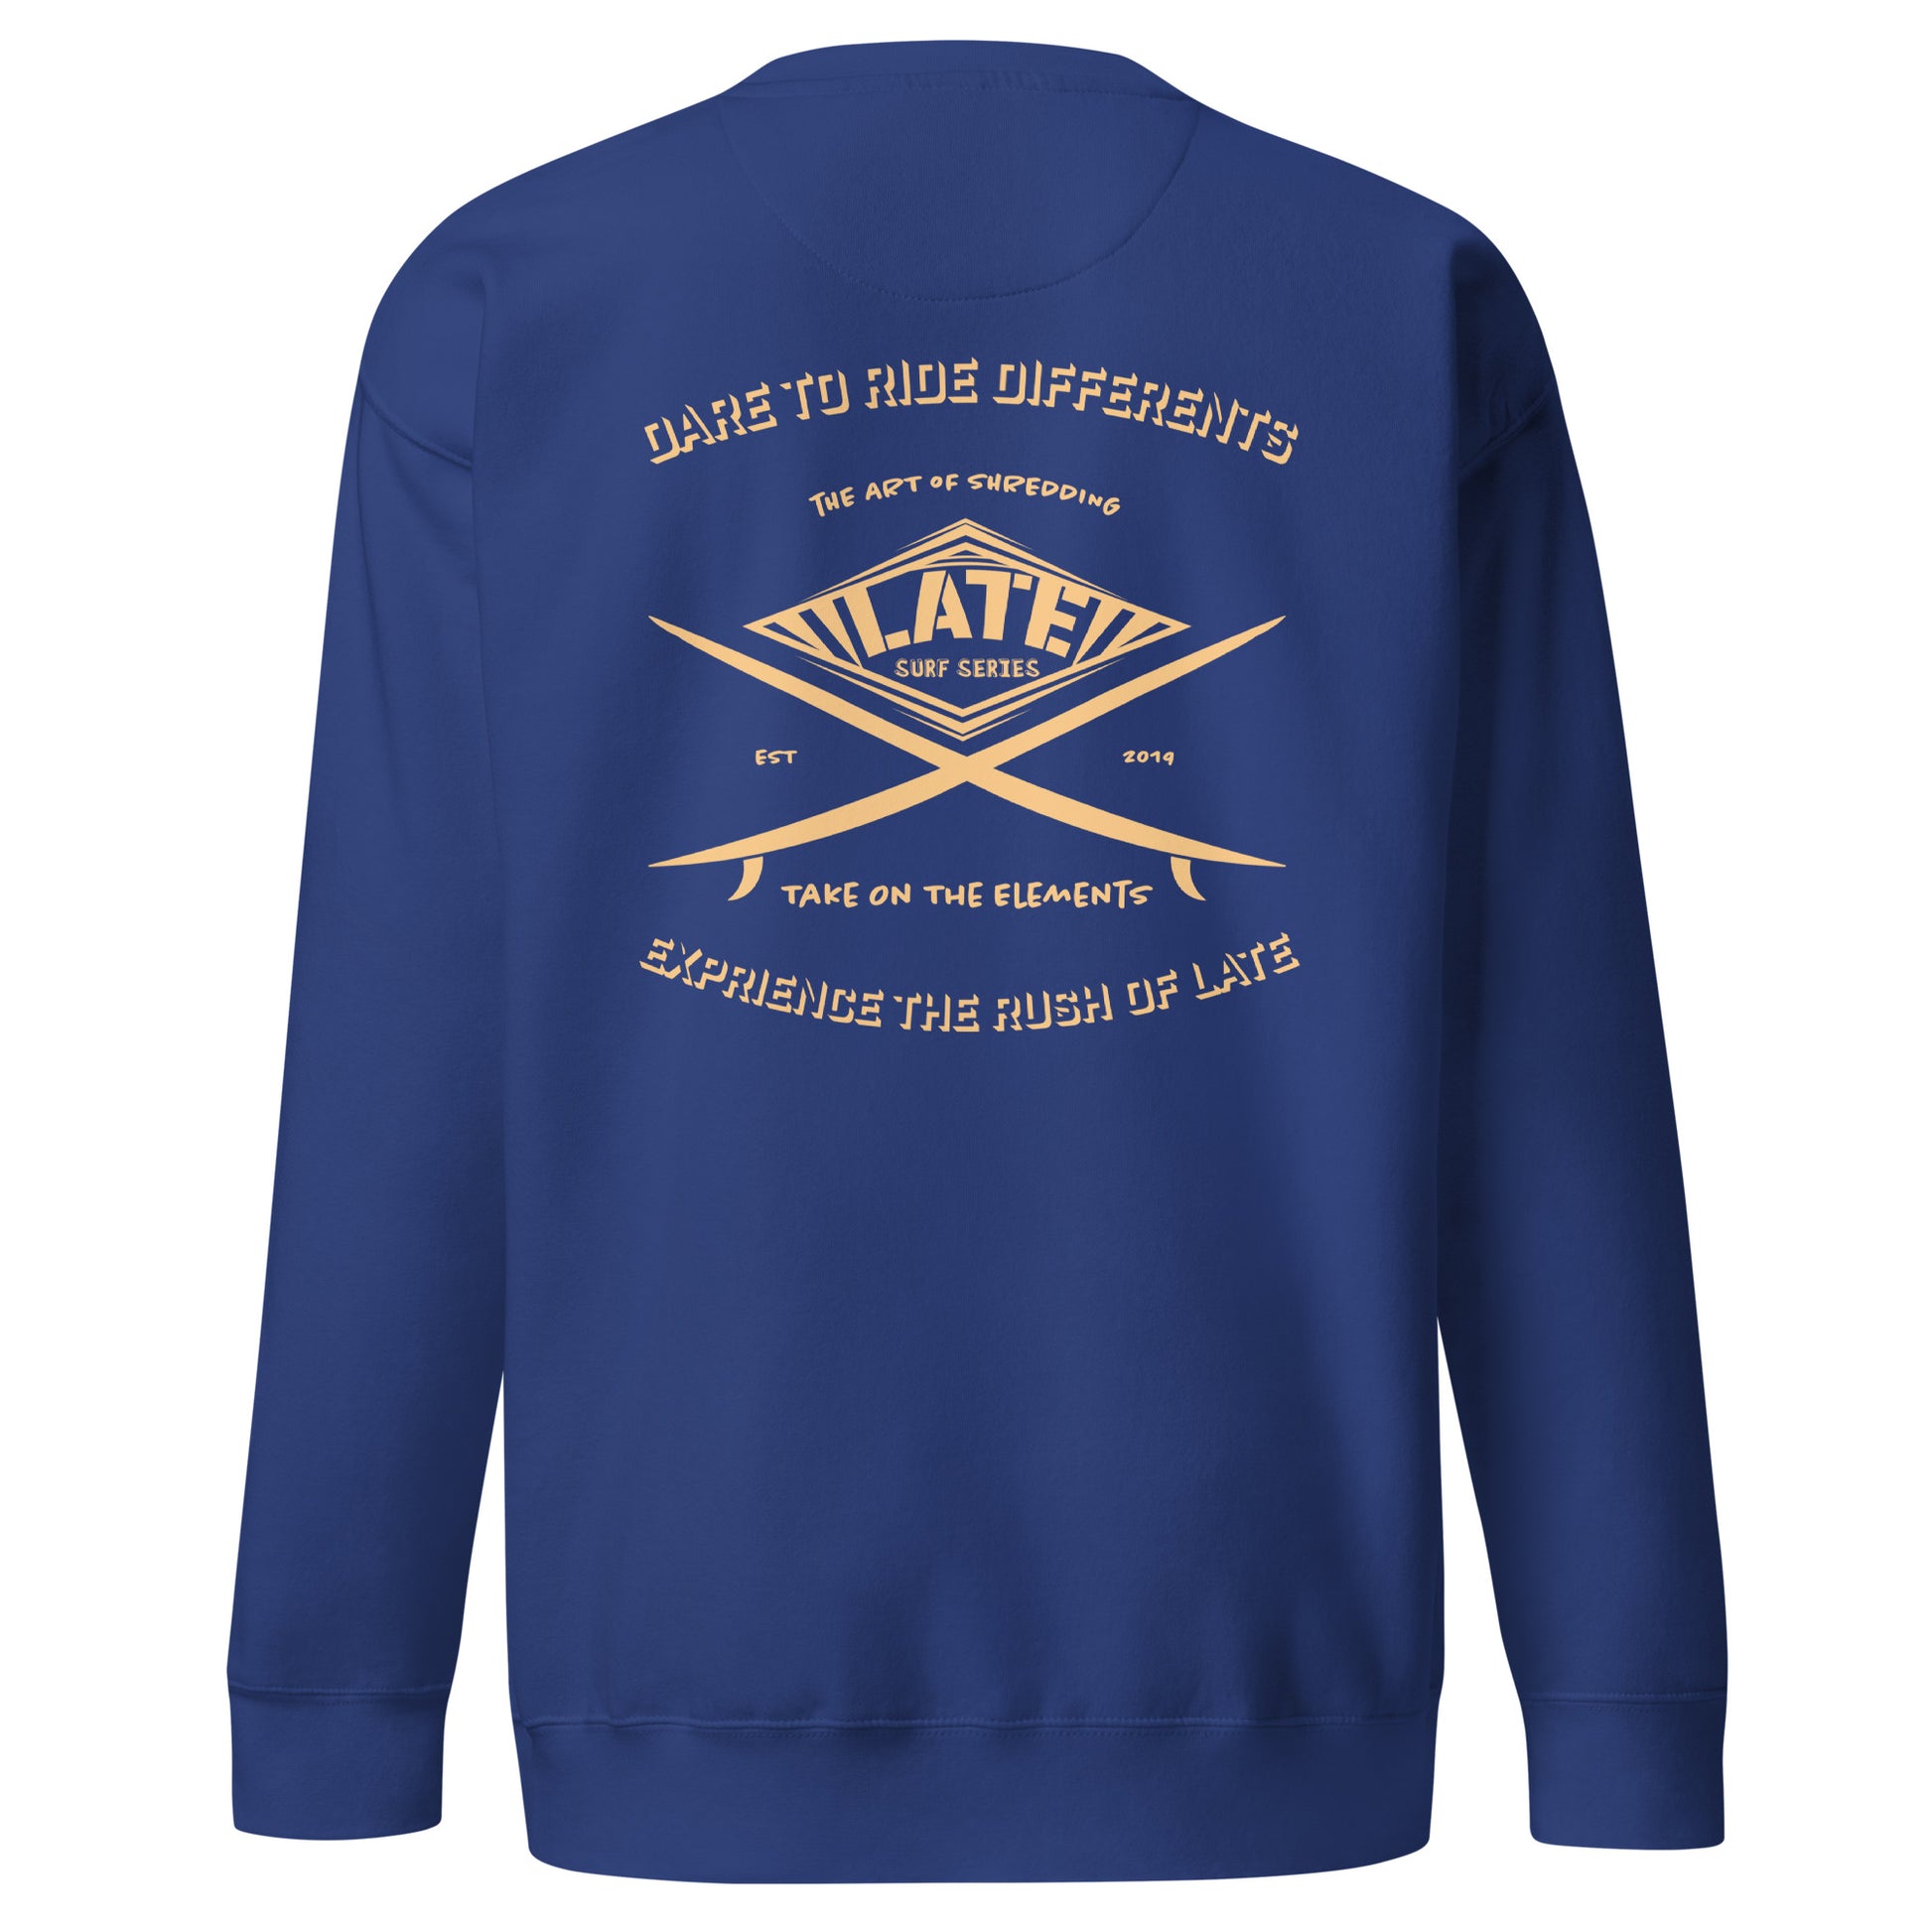 Sweatshirt surfboard dare to ride differents Take On The Elements experience the rush with Late de dos unisex couleur bleu